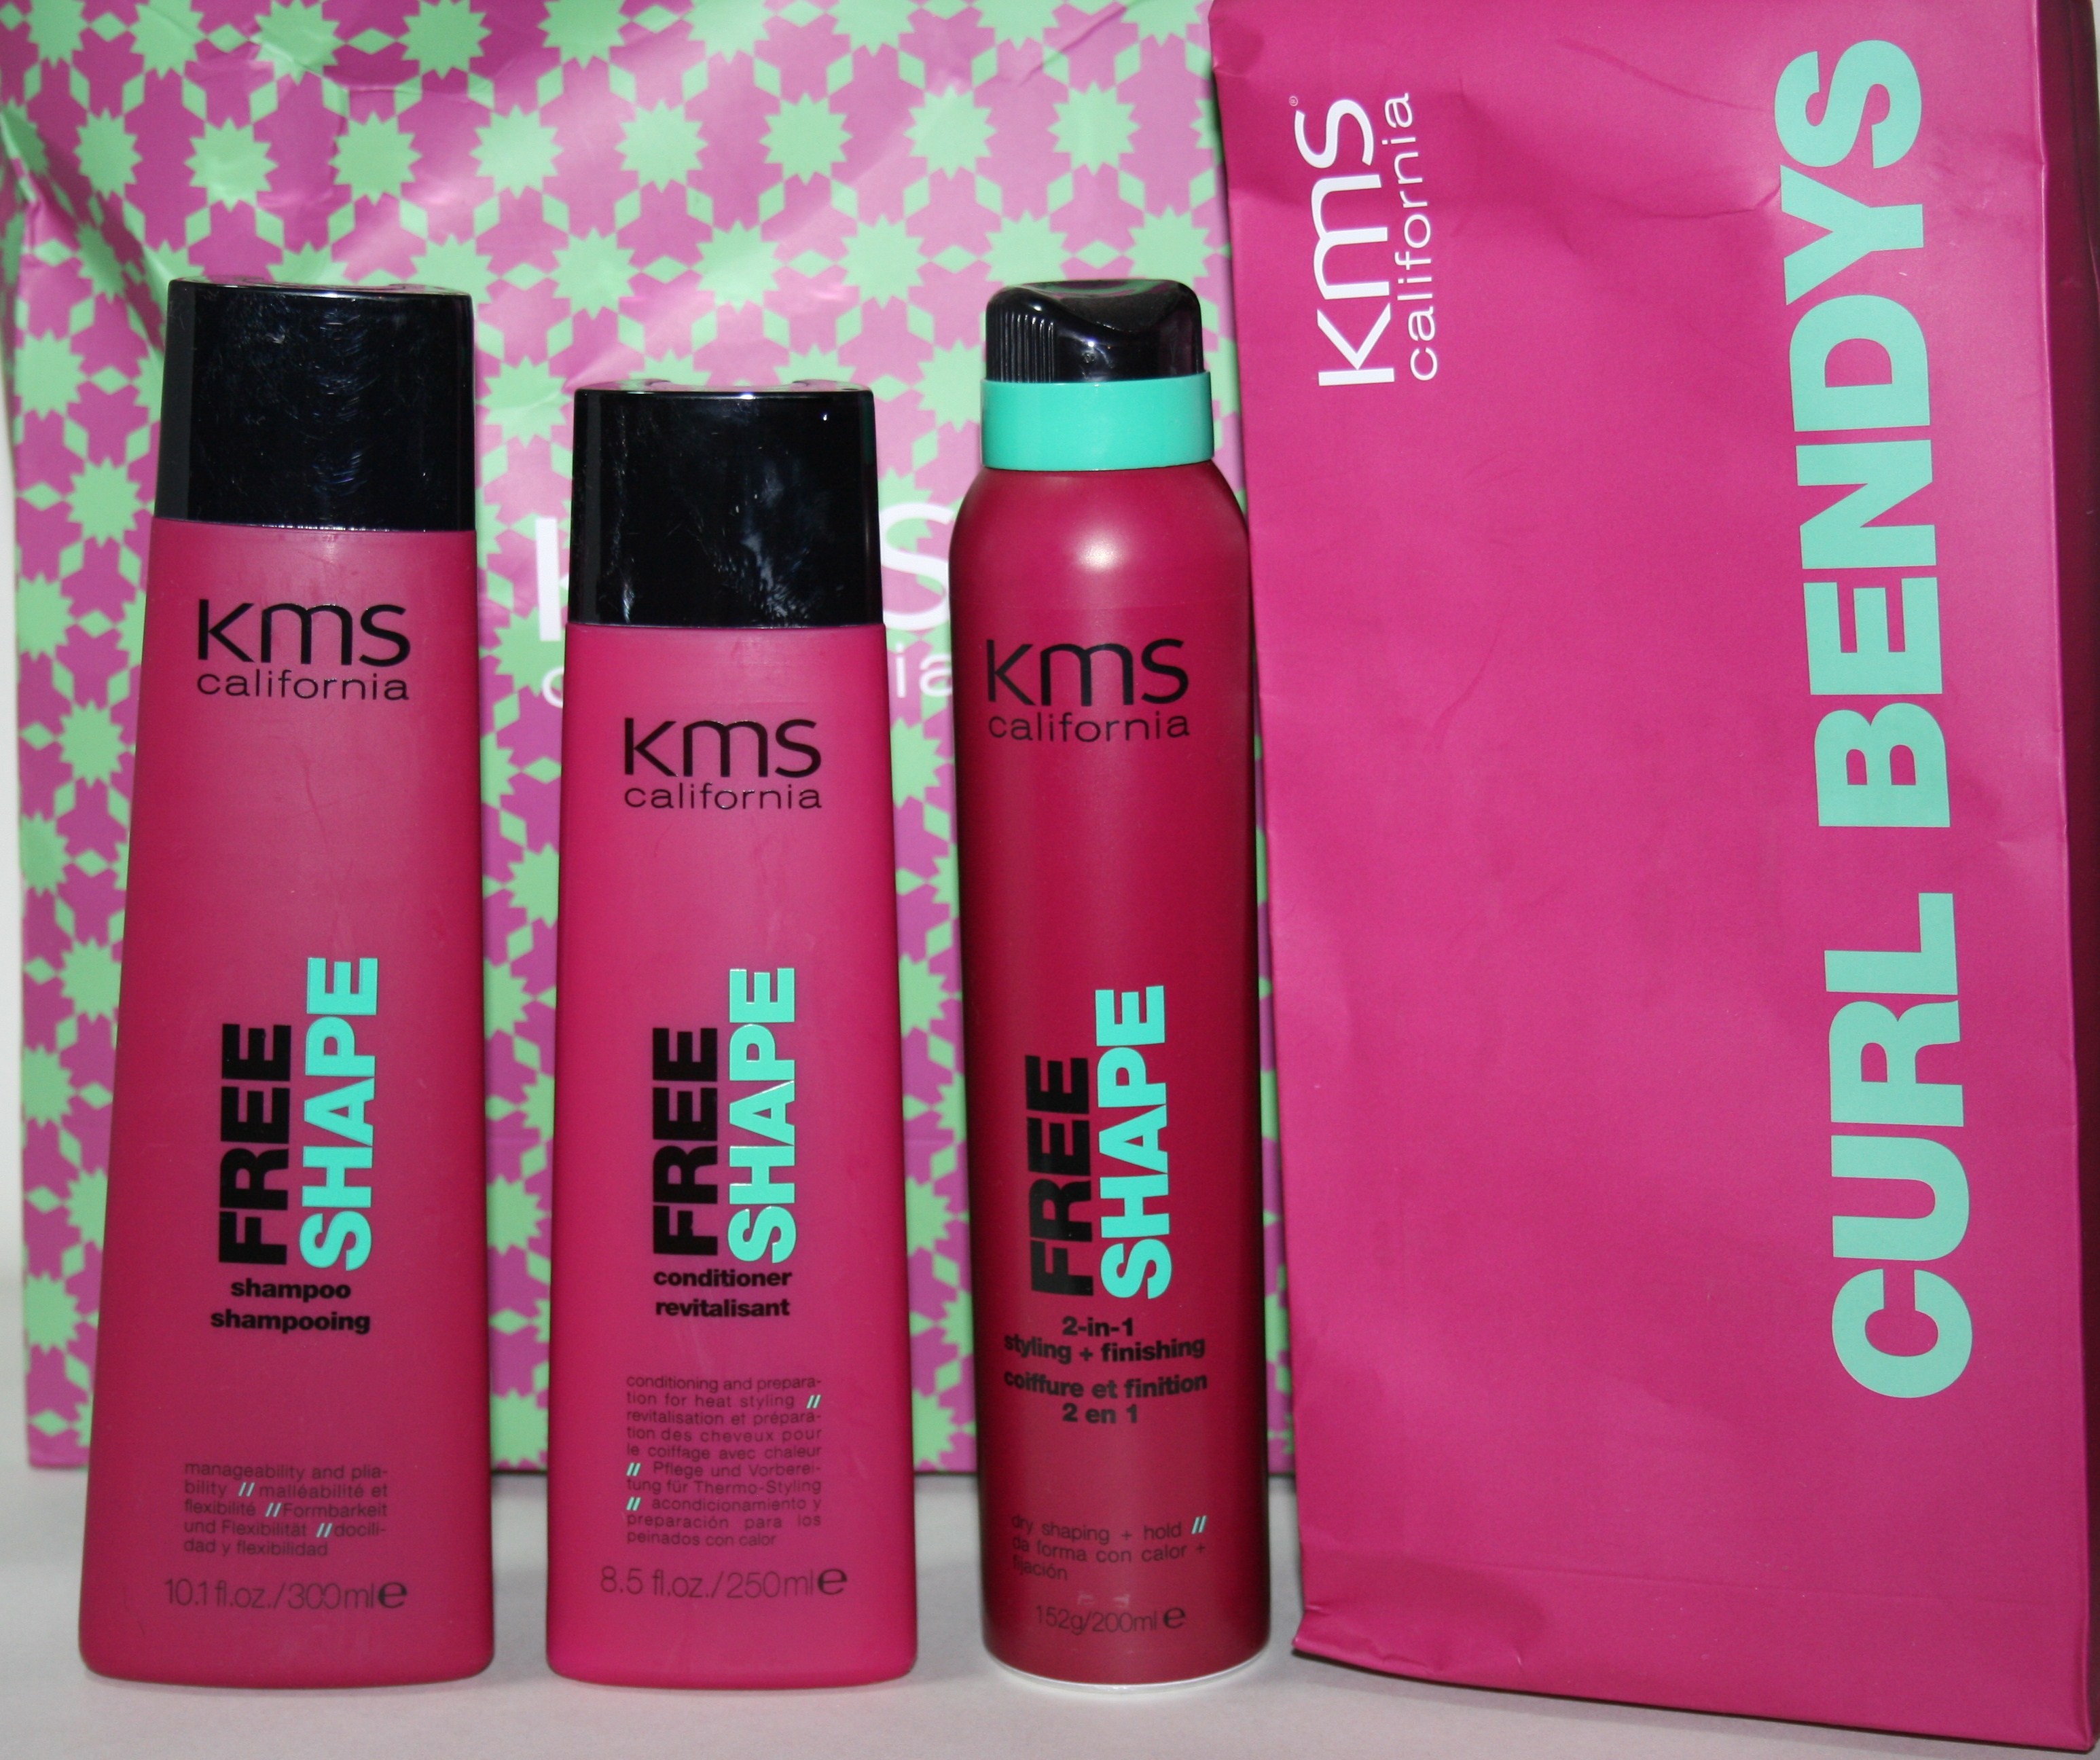 12 Gifts of Christmas: KMS California Create Waves Kit